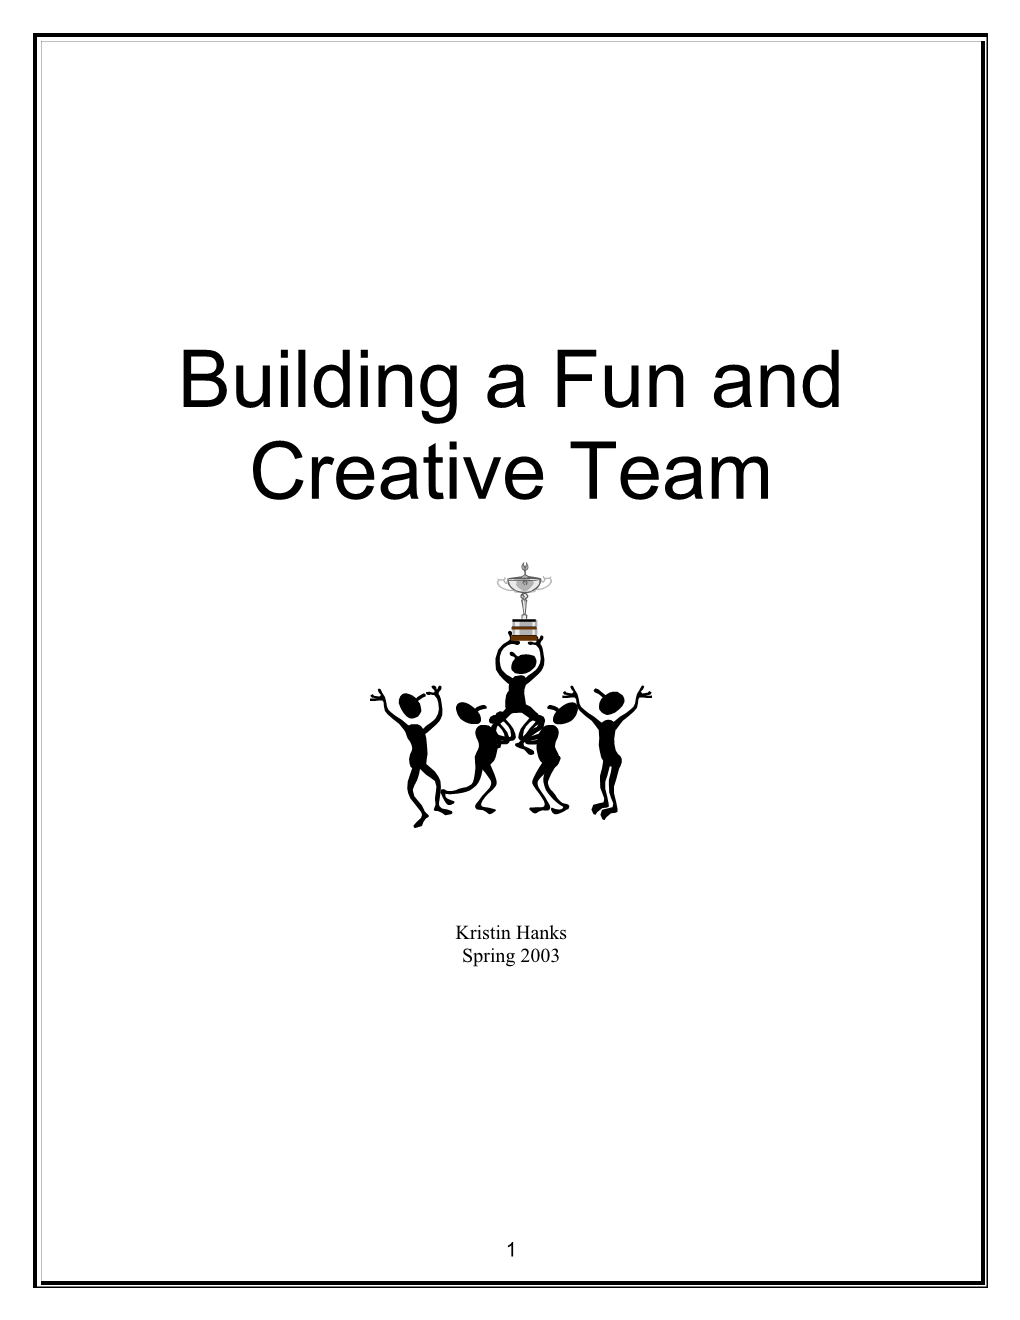 Motivating Your Team For Optimal Creativity And Fun